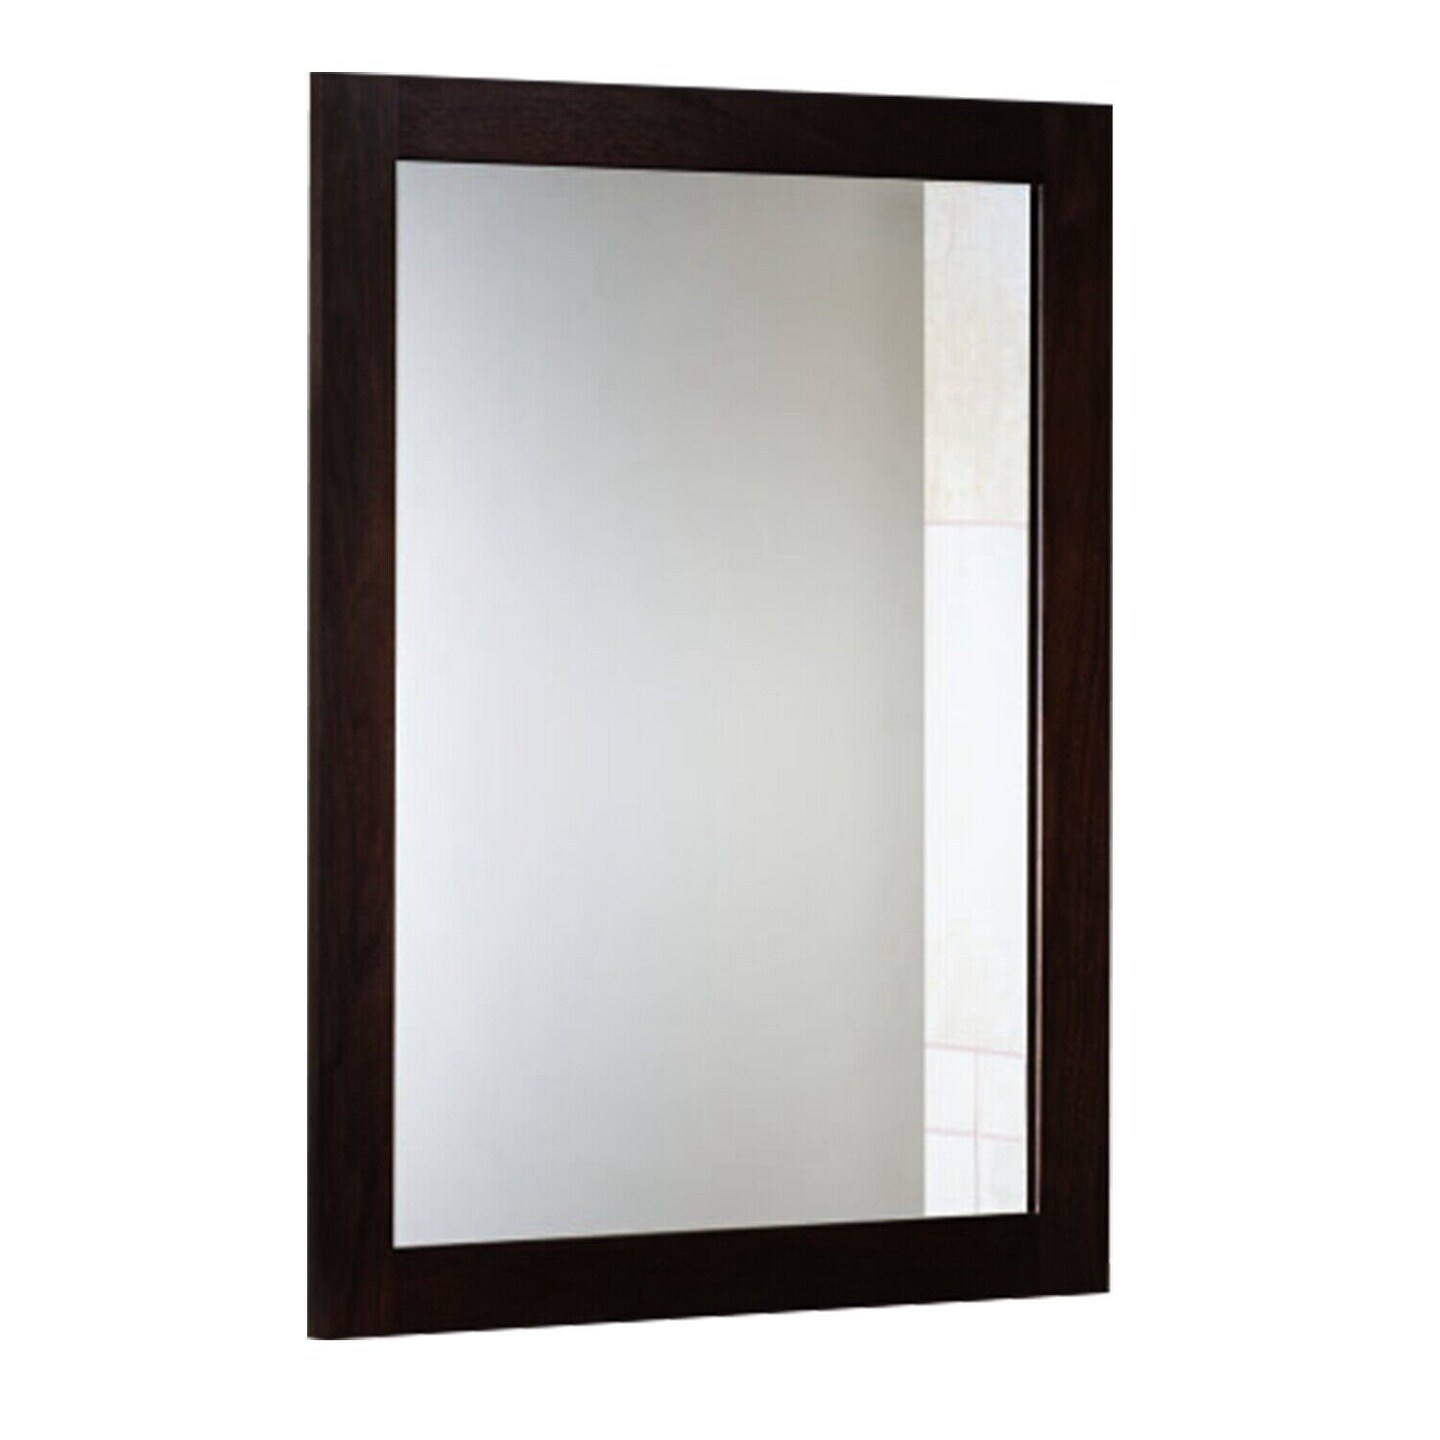 Modern Rectangle Wall-Mounted Bathroom Makeup Mirror with Frame